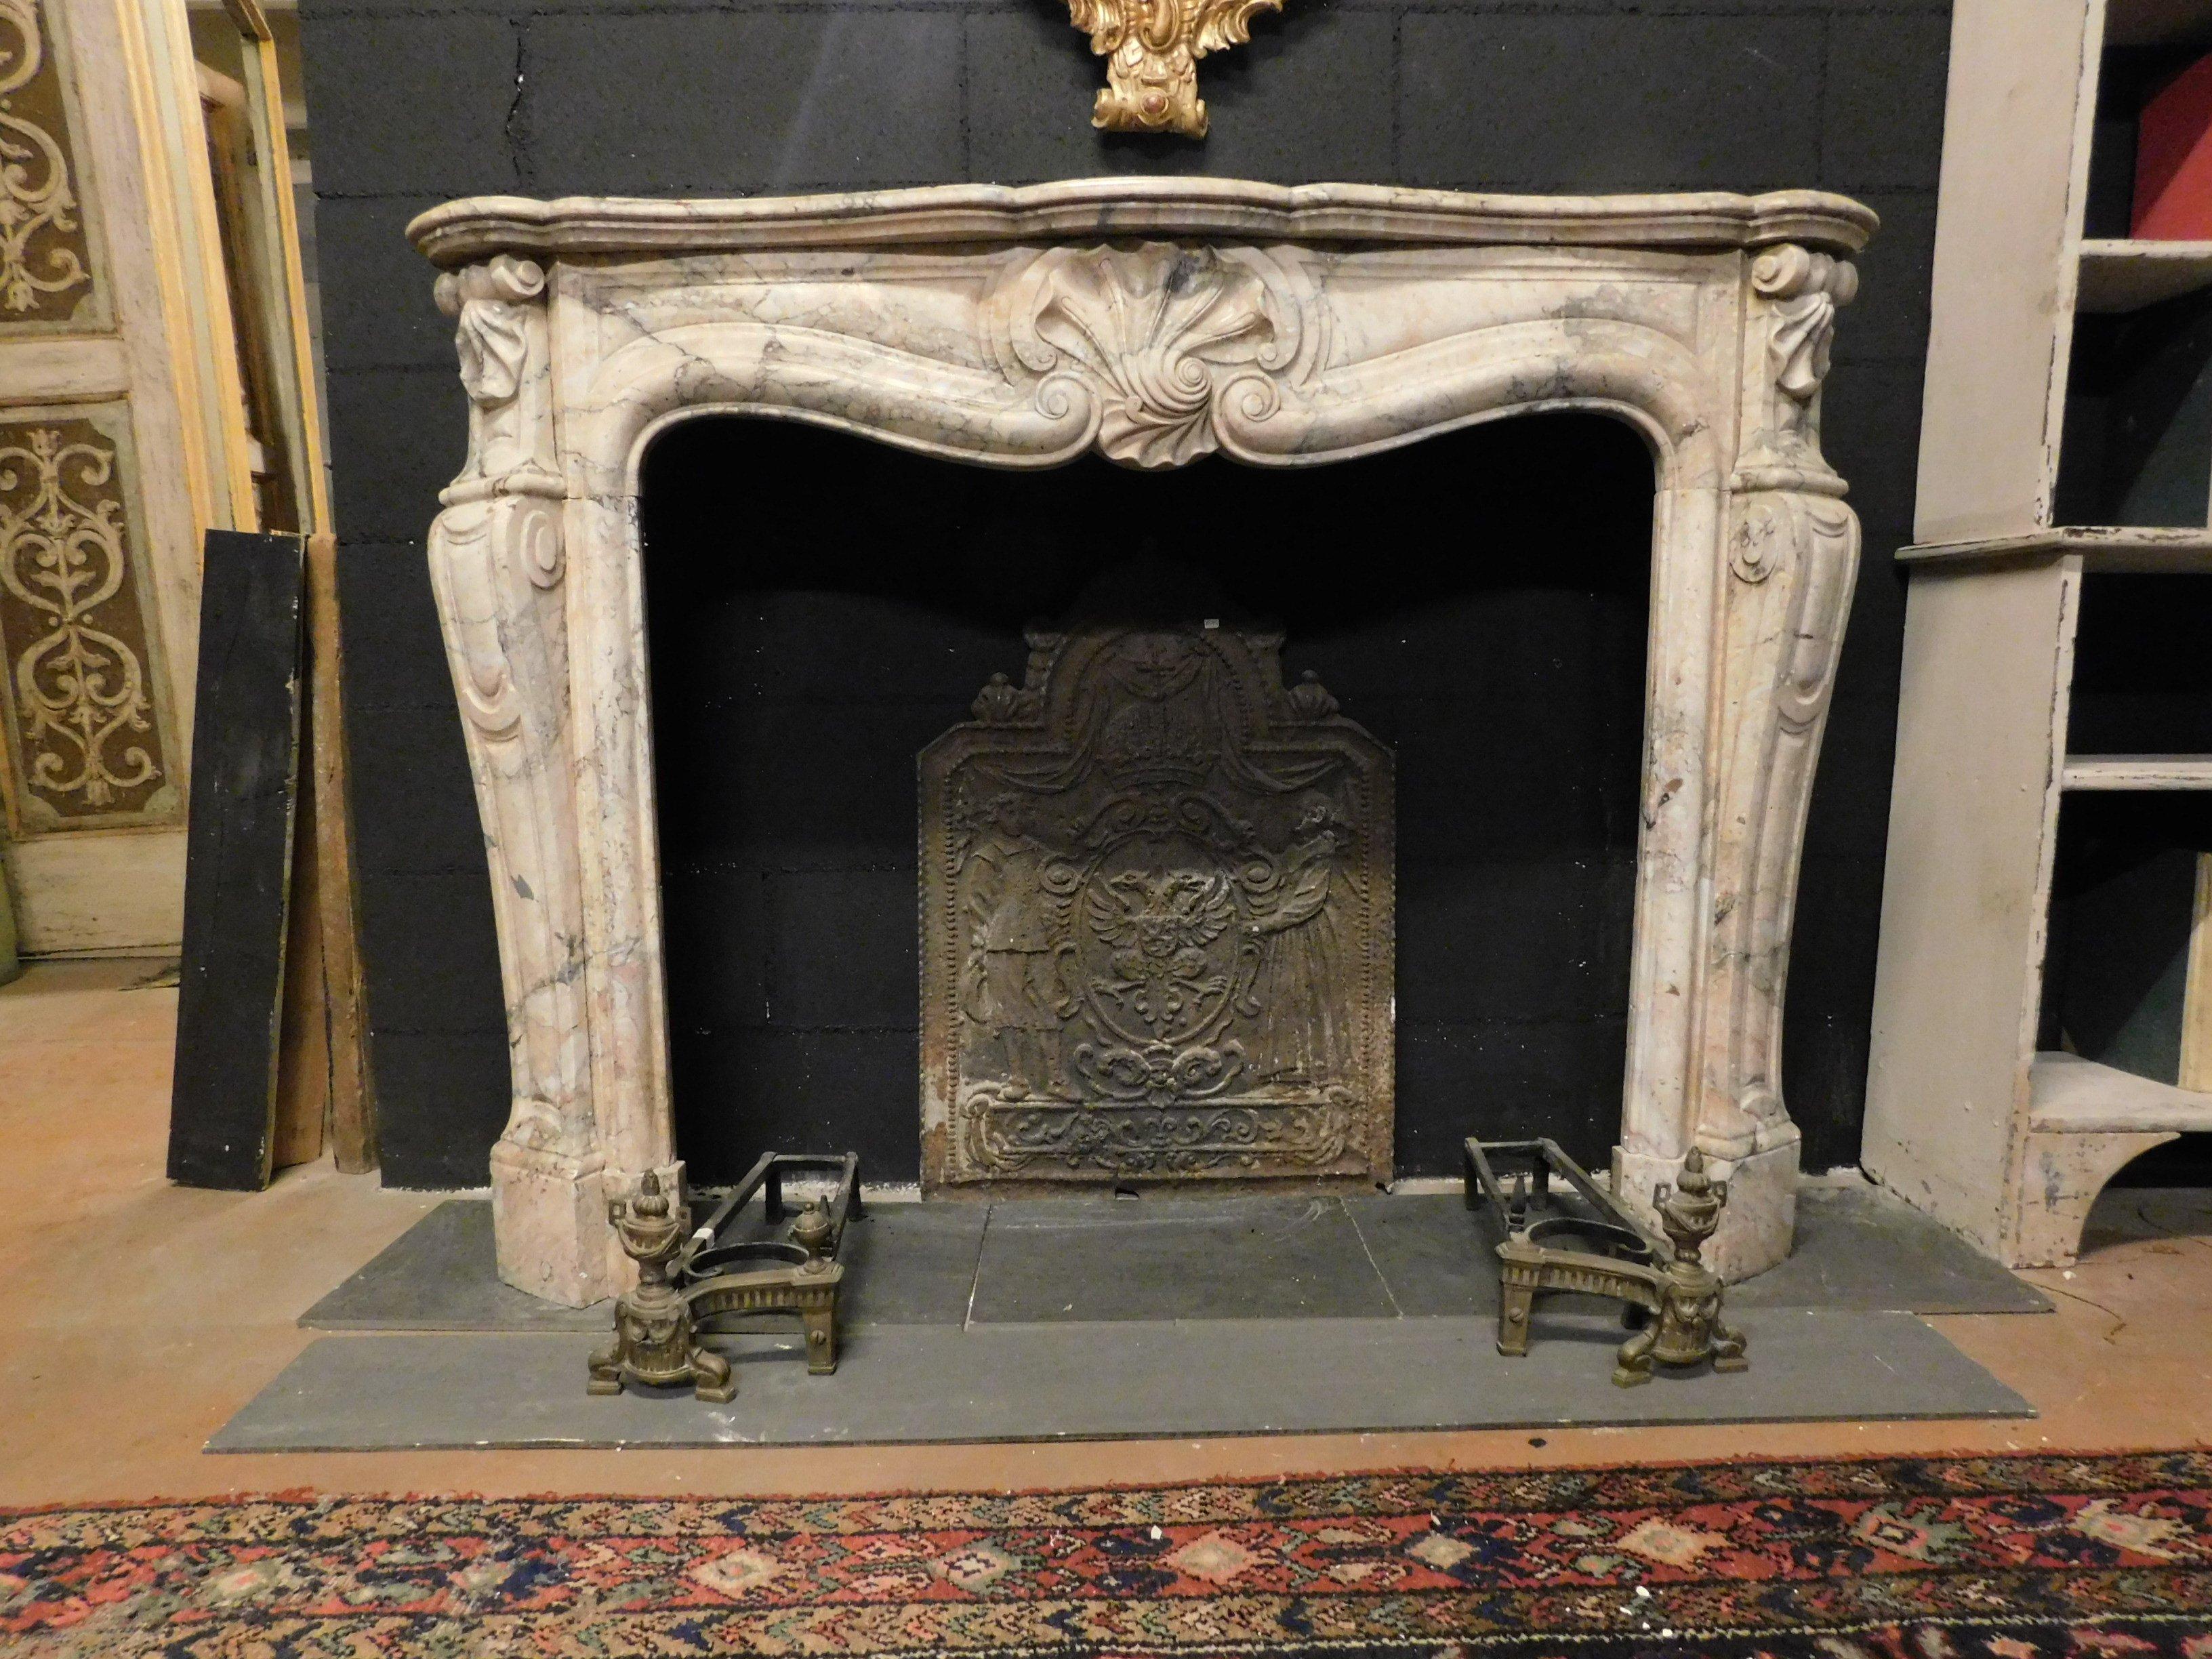 Antique fireplace mantle in precious and rare pink veined marble, hand-carved with a particular central shell and decorated wavy legs, precious, important and authentic of the full 18th century, coming from a palace in France.
Of great taste and